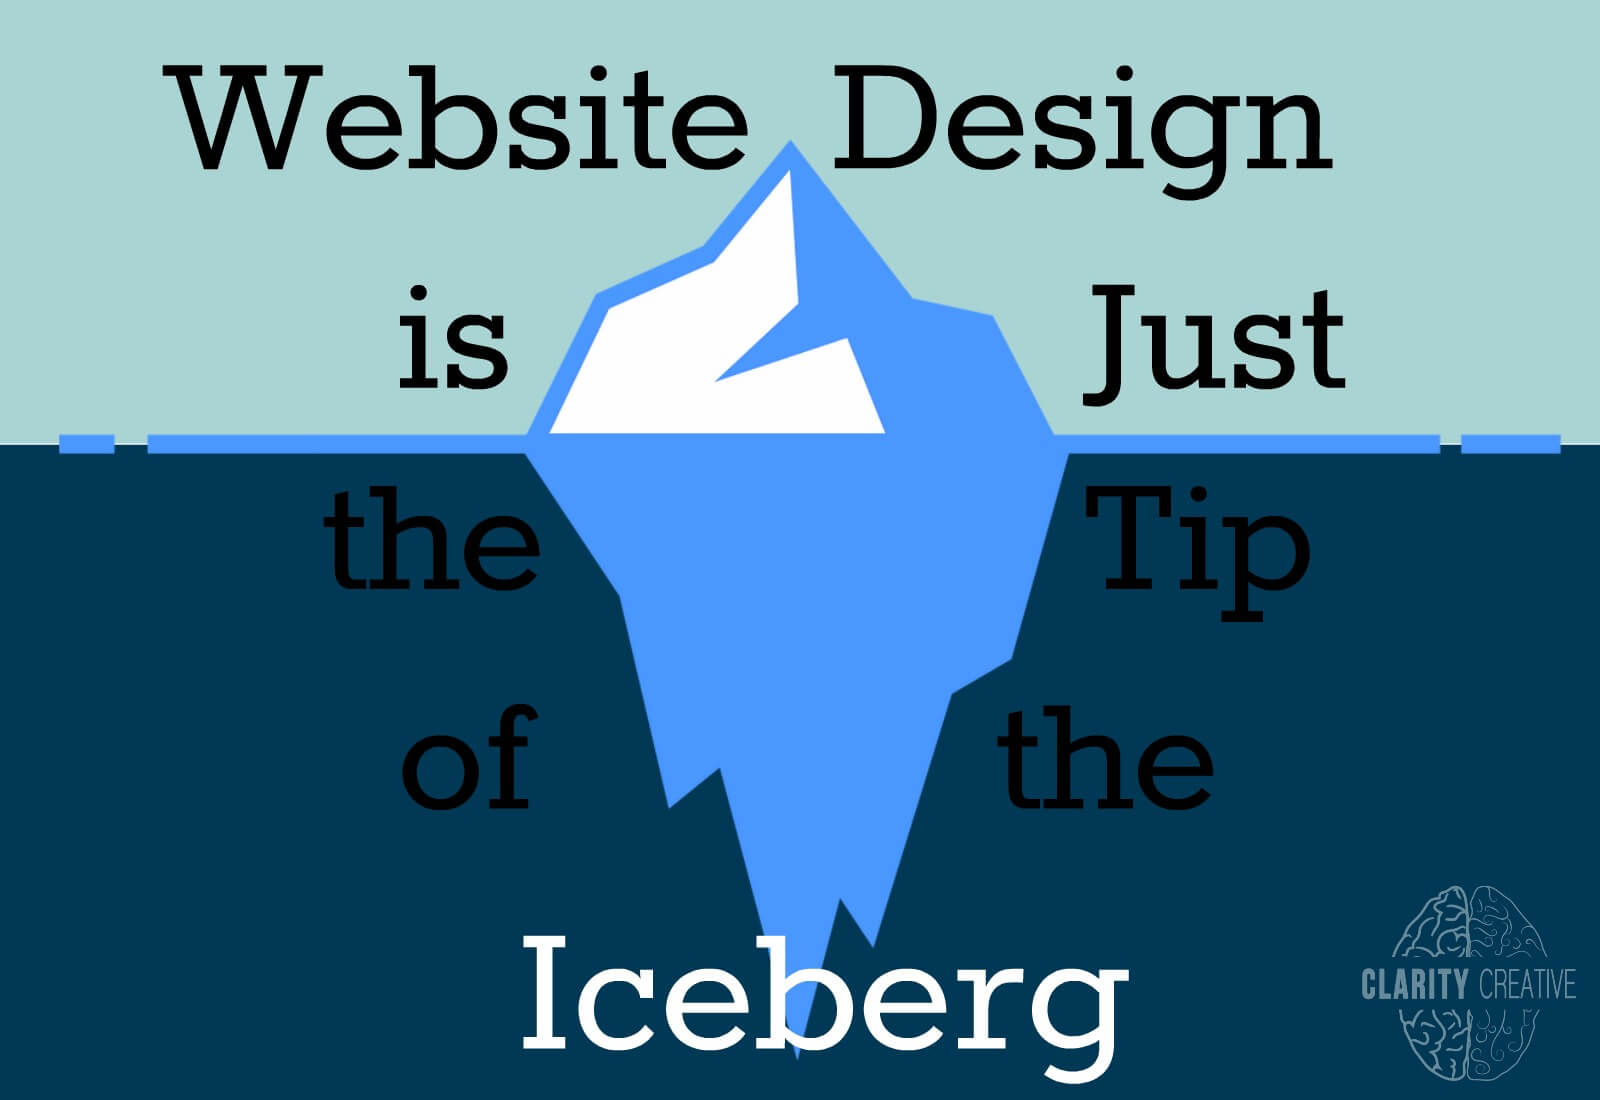 Website Design is just the tip of the iceberg